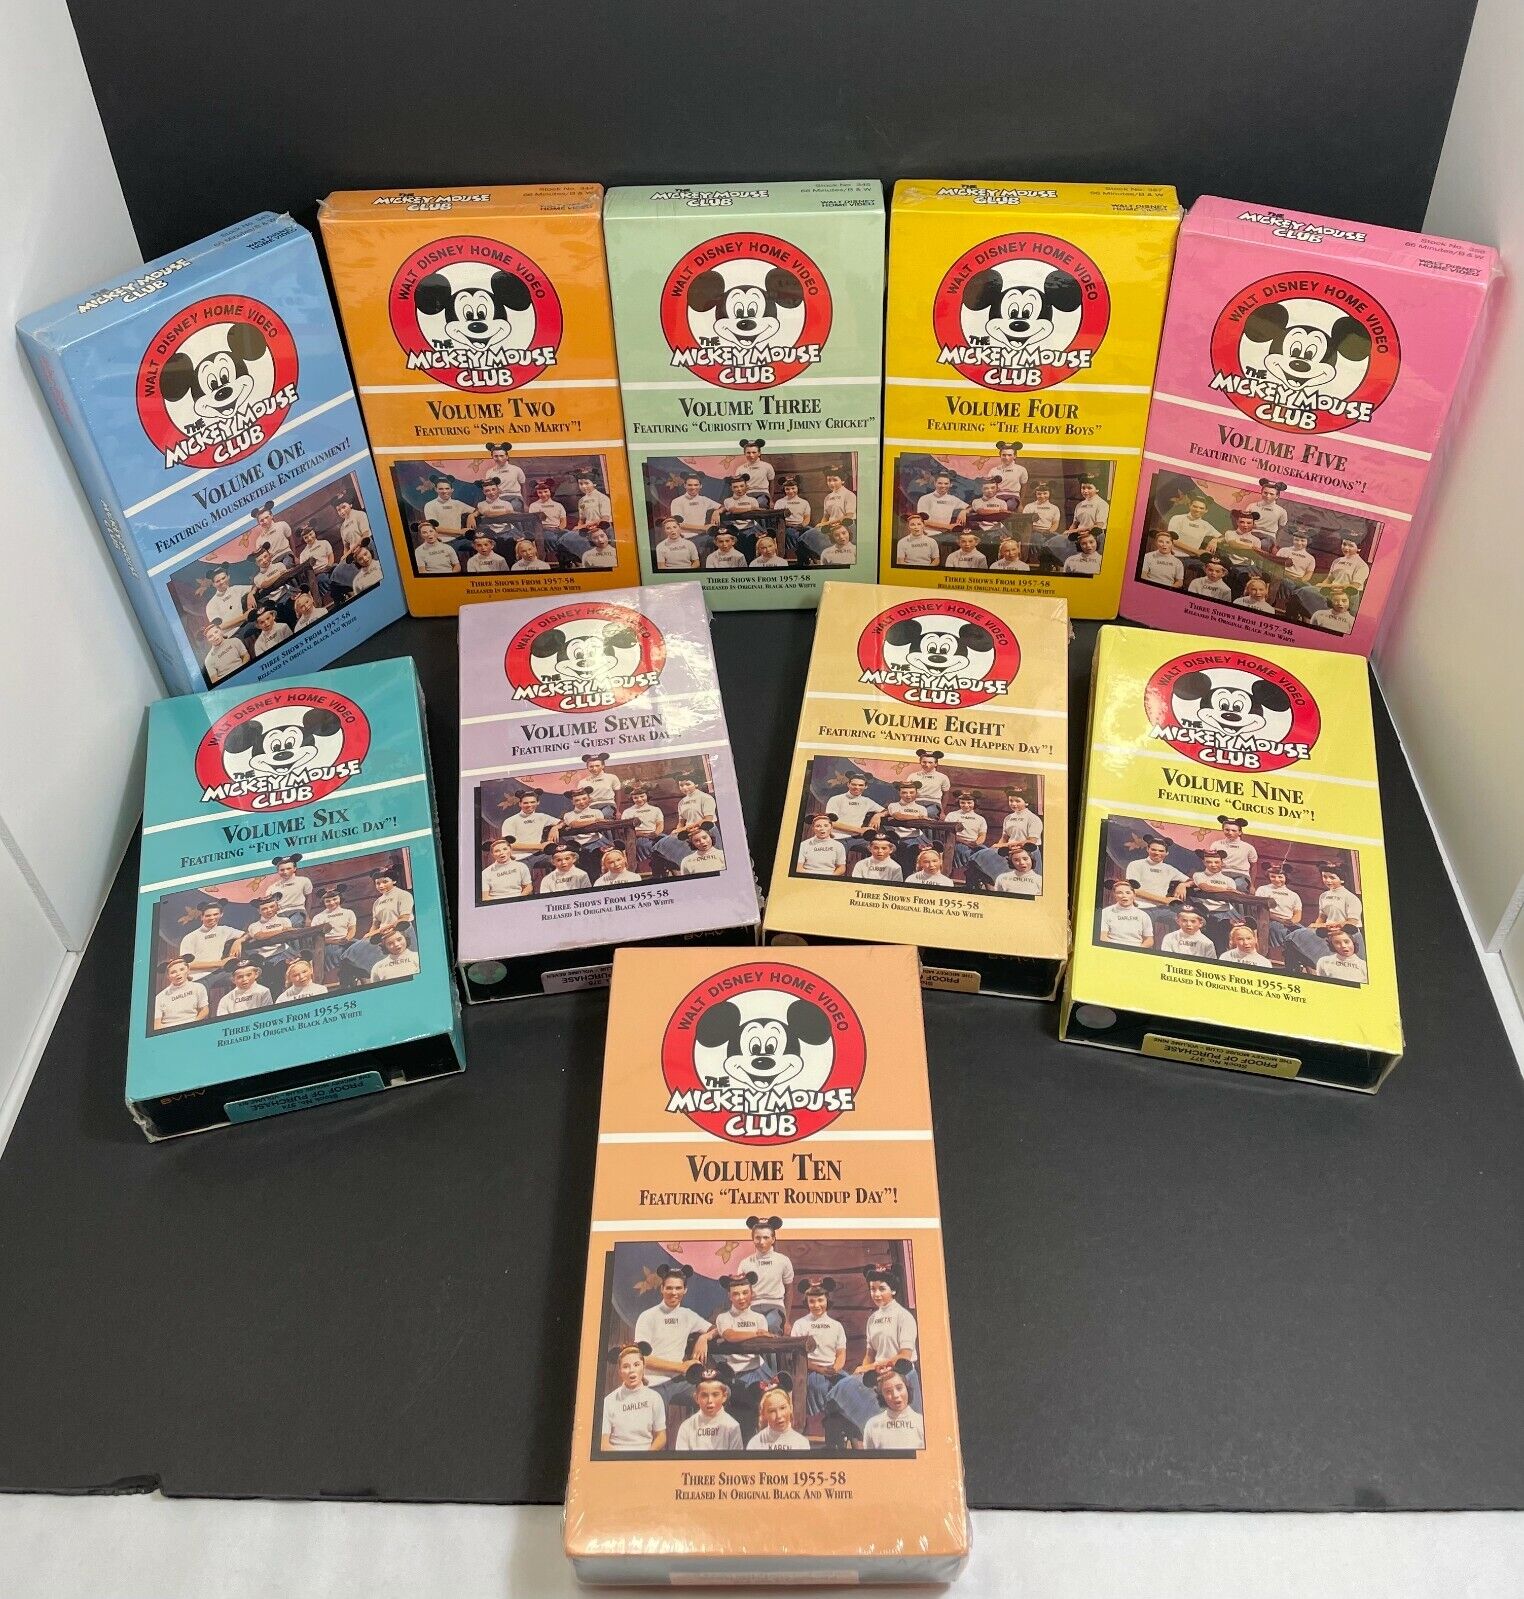 Walt Disney Mickey Mouse Club Vol Volume 1-10 VHS Tapes All sealed Complete Set